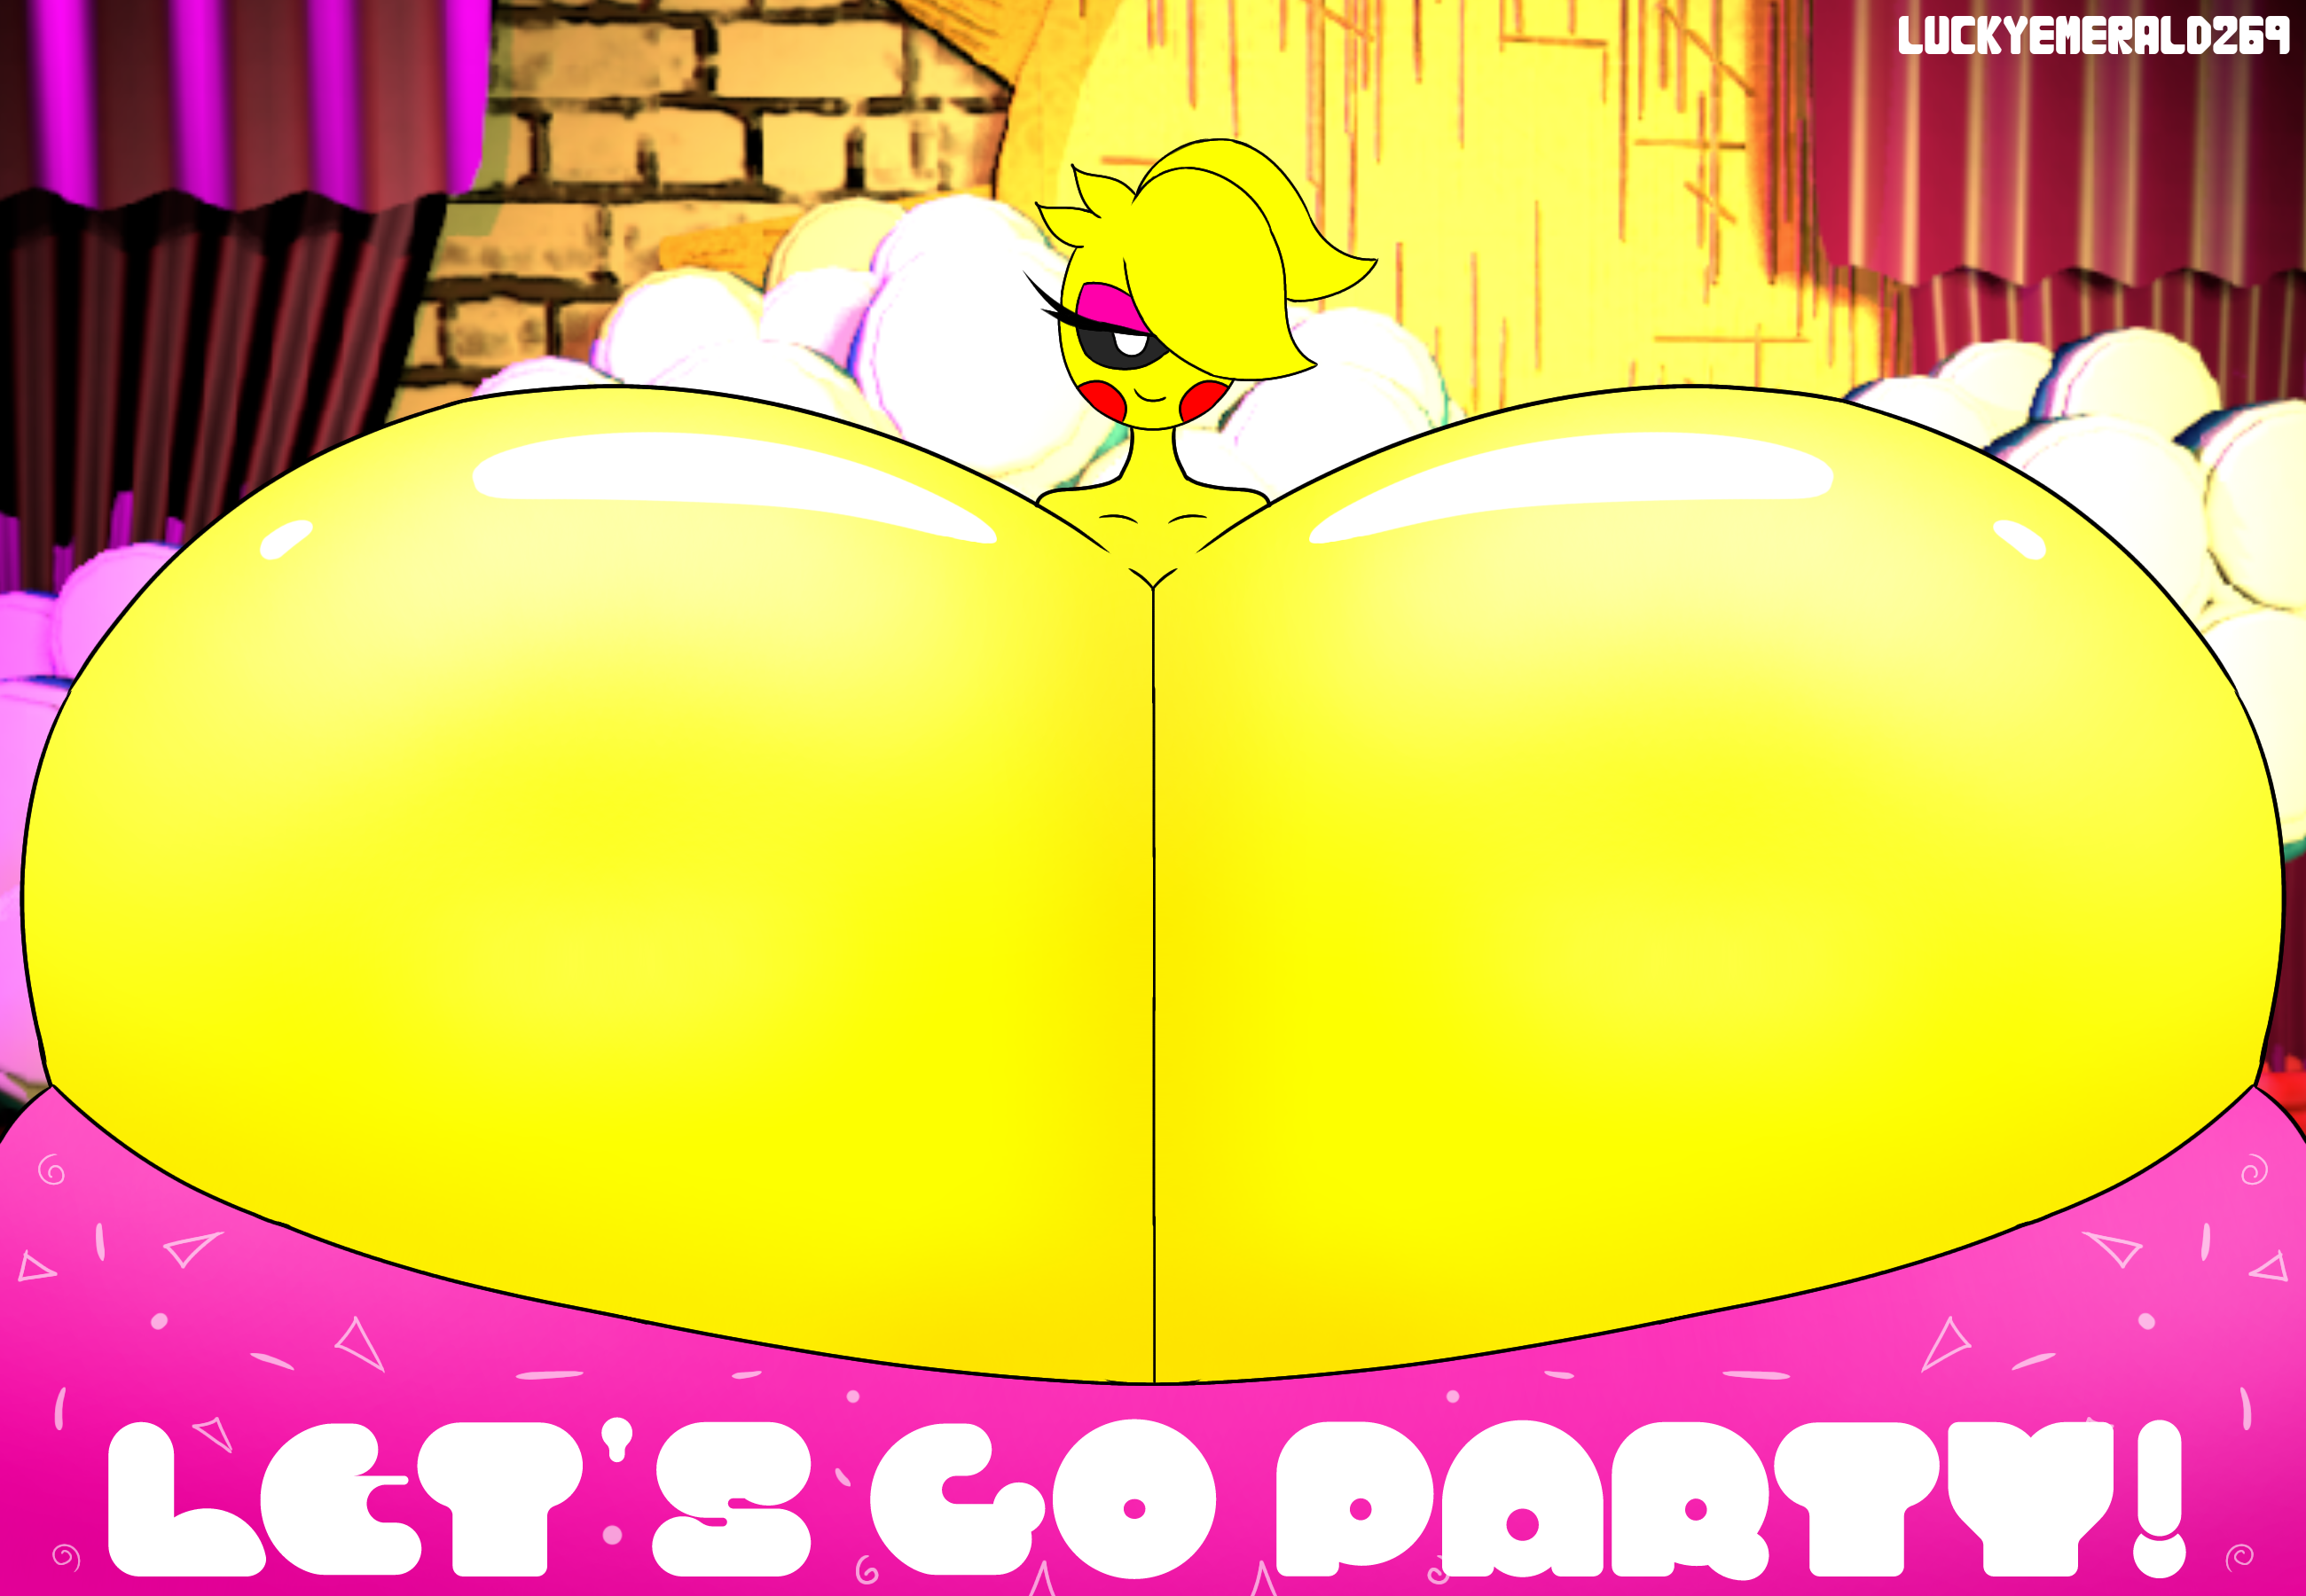 Welcome To Toy Chica Pizza Breasts Expansion By Luckyemerald269 On Deviantart